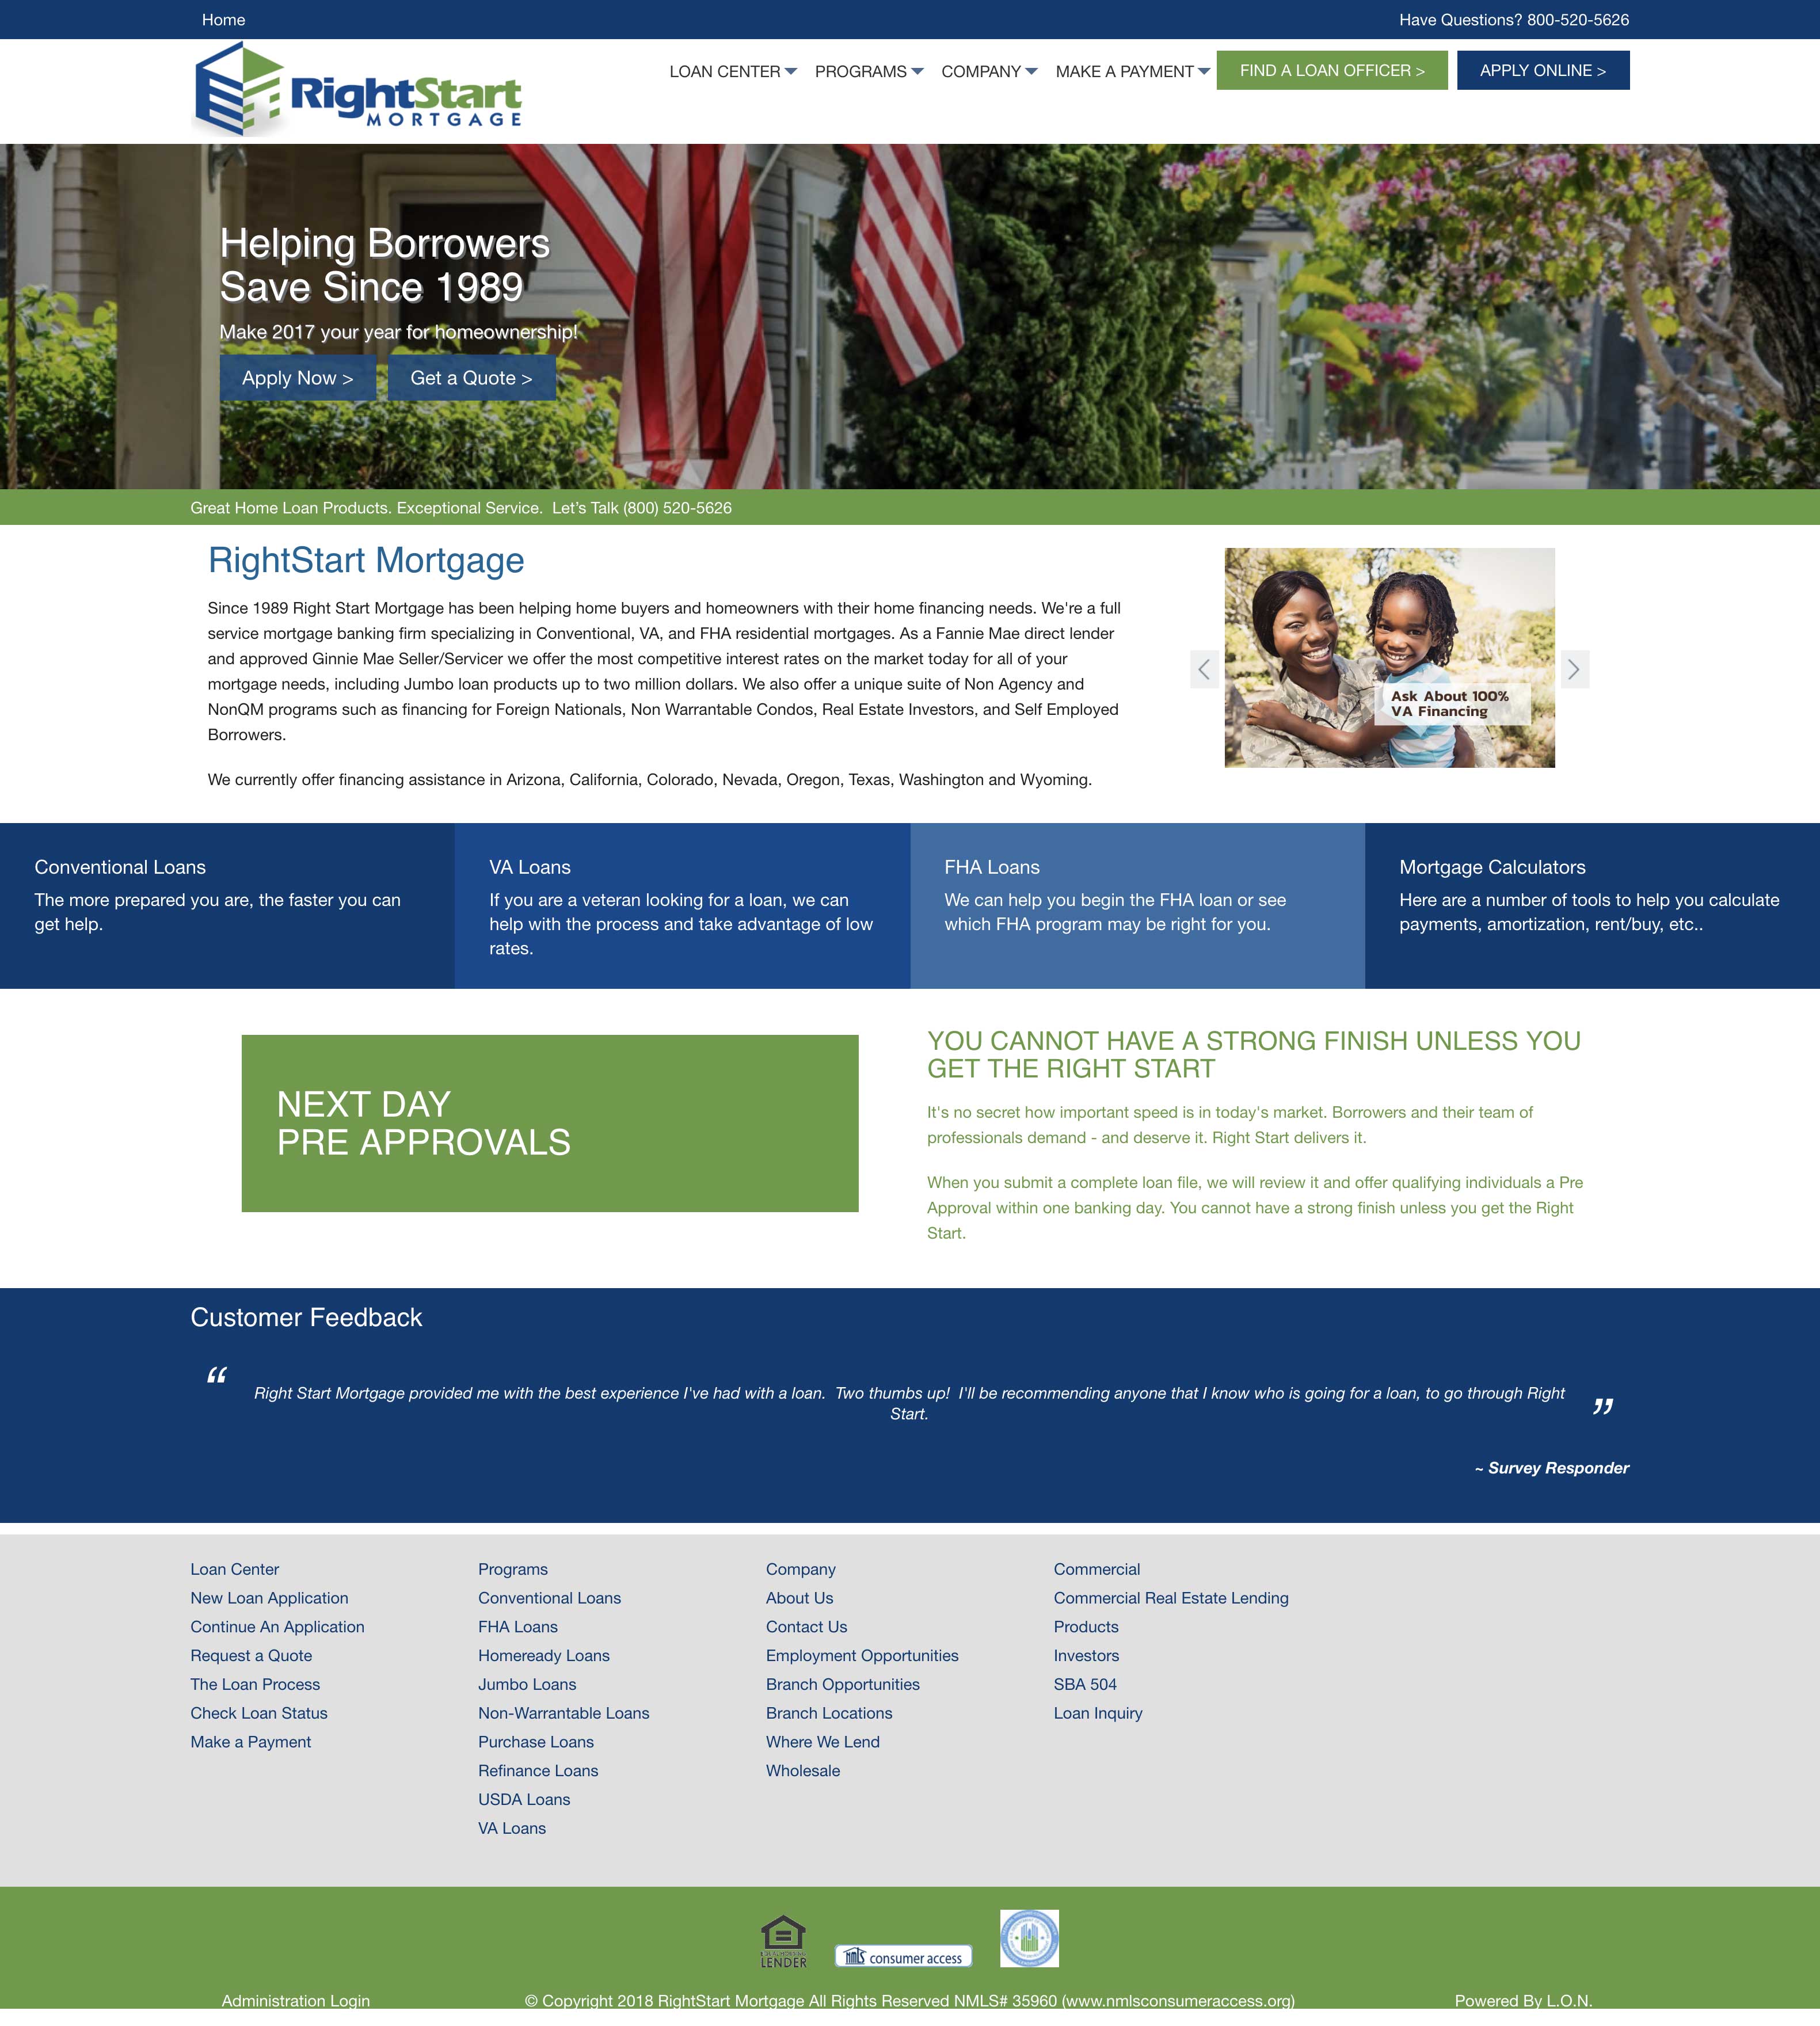 before-multiverse-website-design-right-start-mortgage---homepage